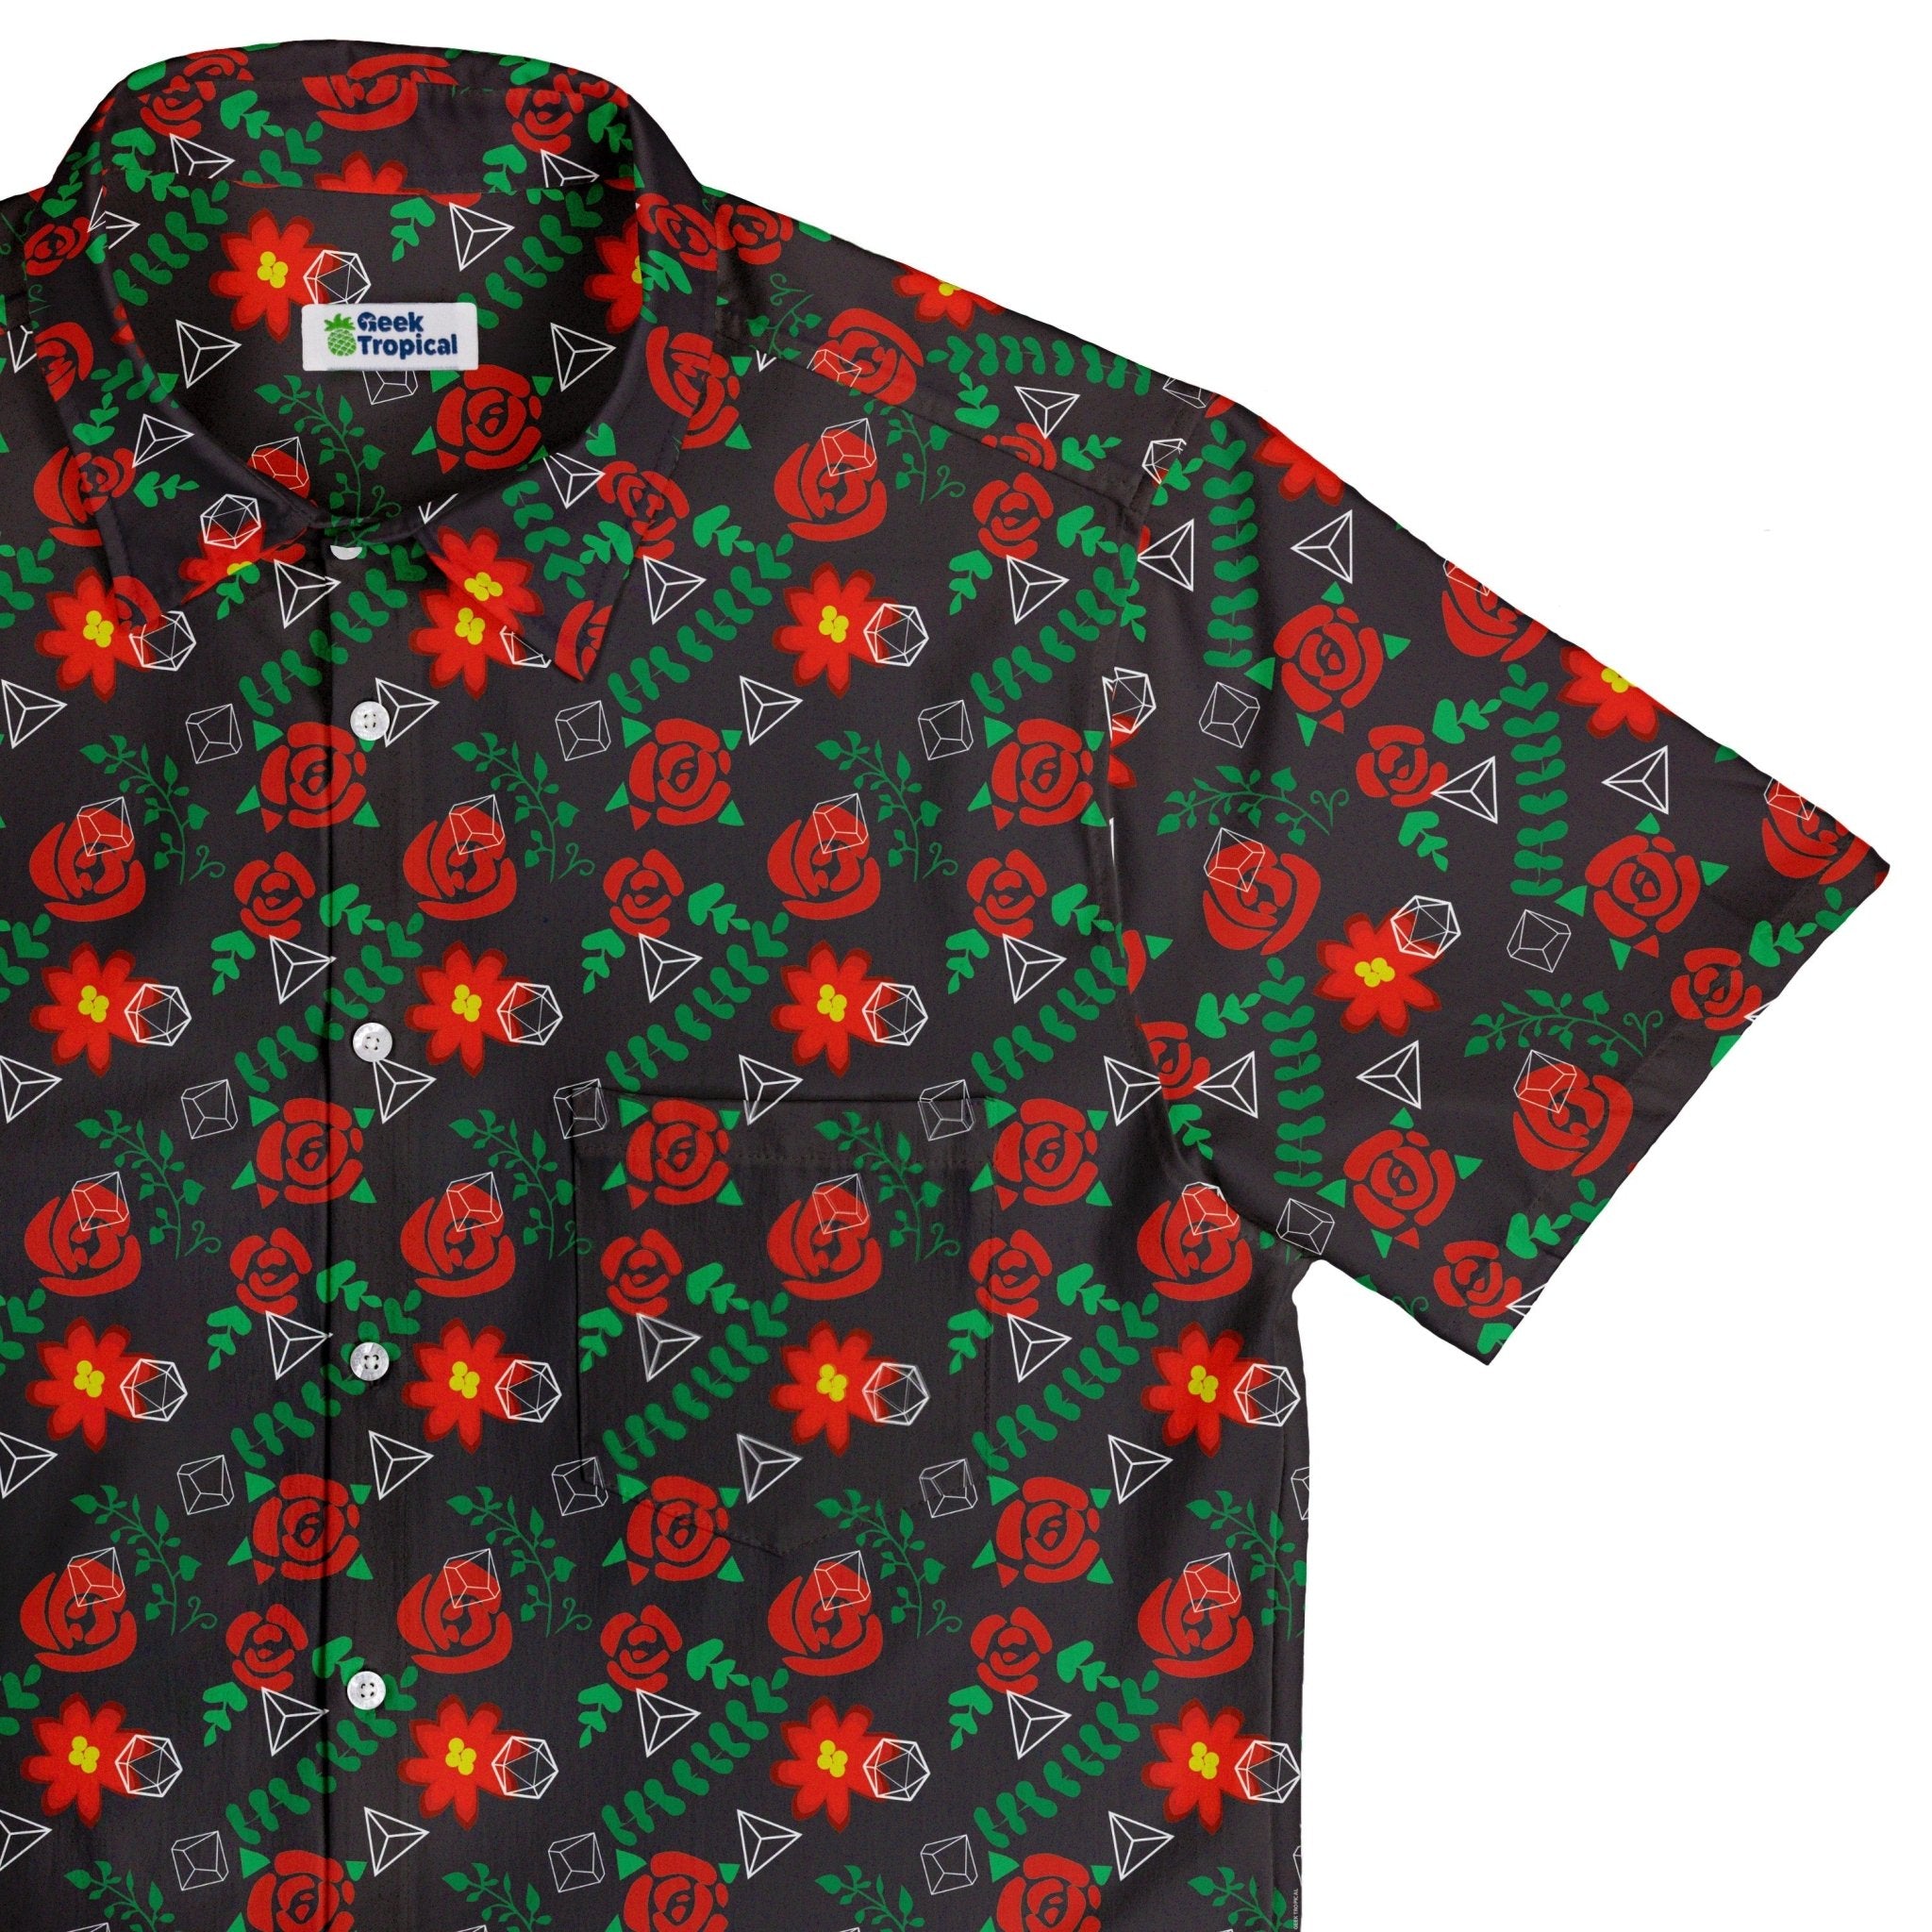 Dice and Roses Button Up Shirt - adult sizing - Botany Print - Design by Heather Davenport